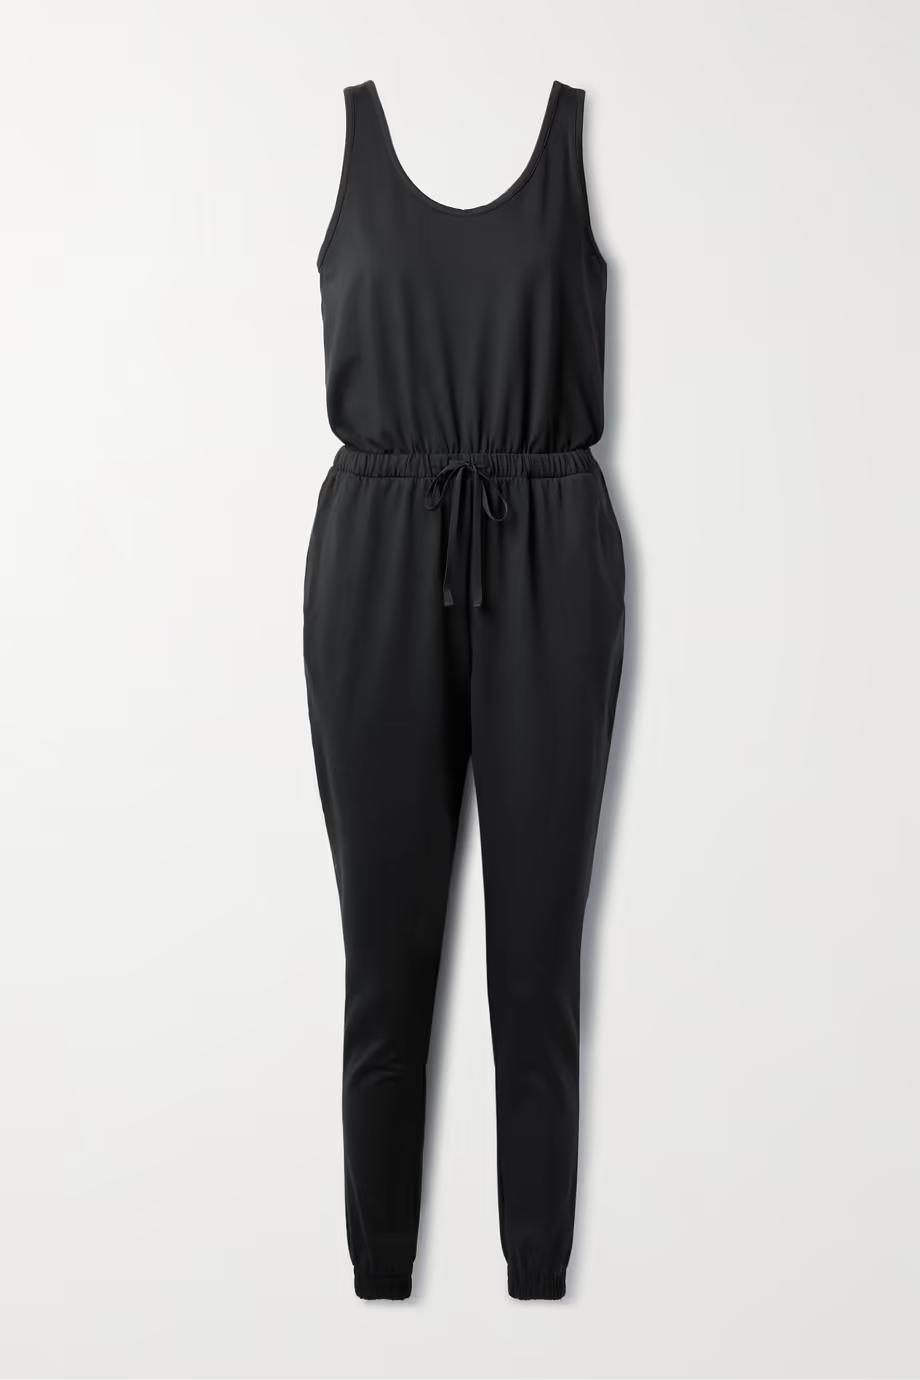 Girlfriend Collective + Stretch Recycled Jersey Jumpsuit